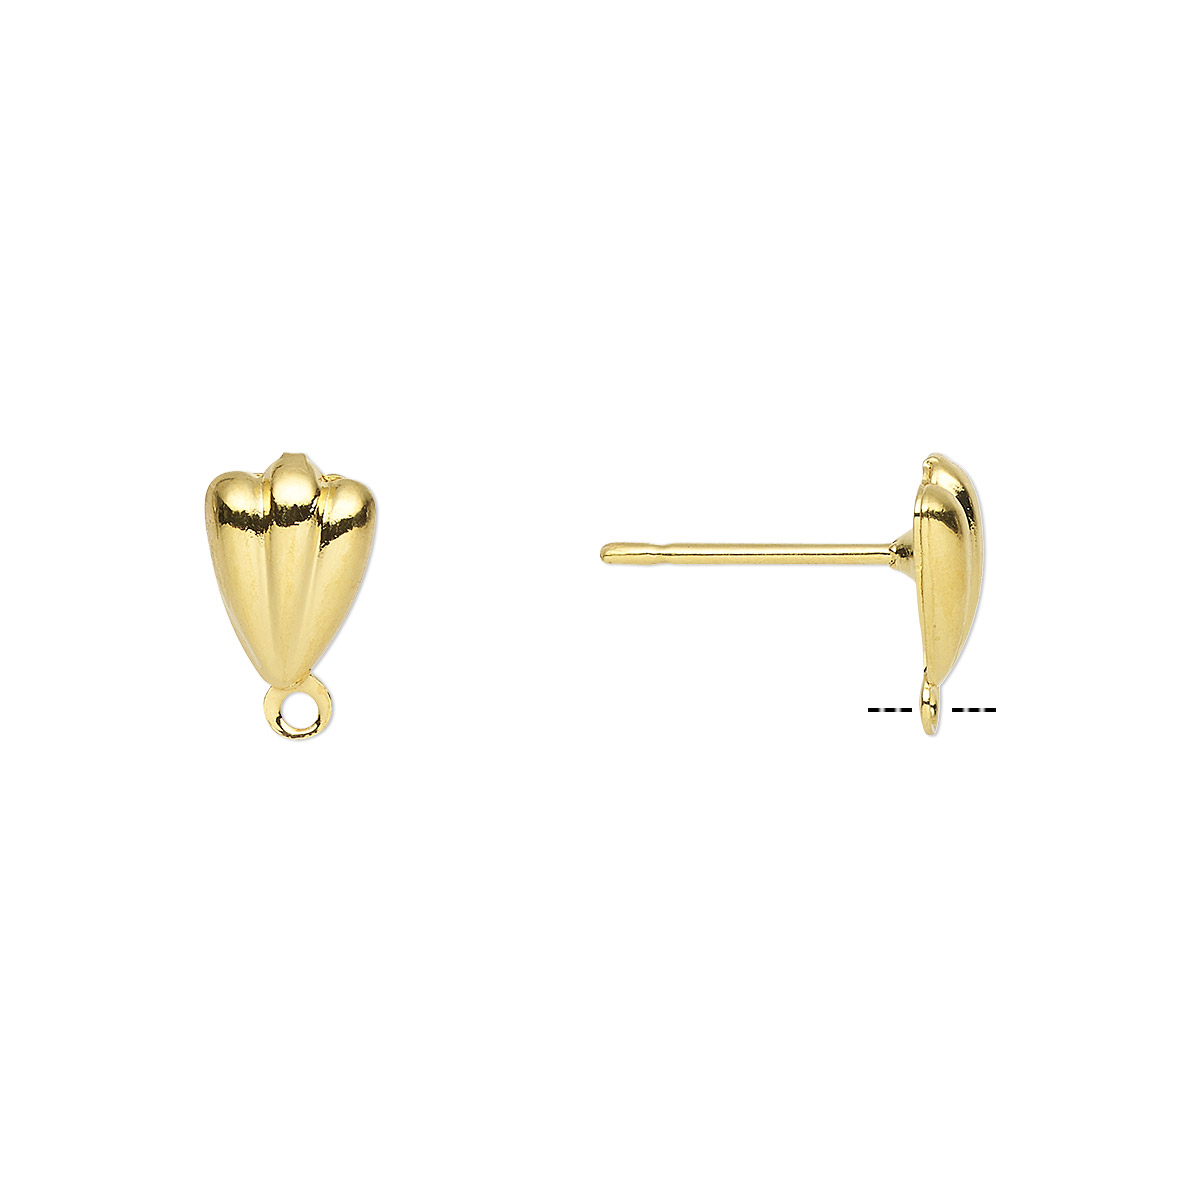 Earstud, gold-plated brass and stainless steel, 8x5mm hollow fancy ...